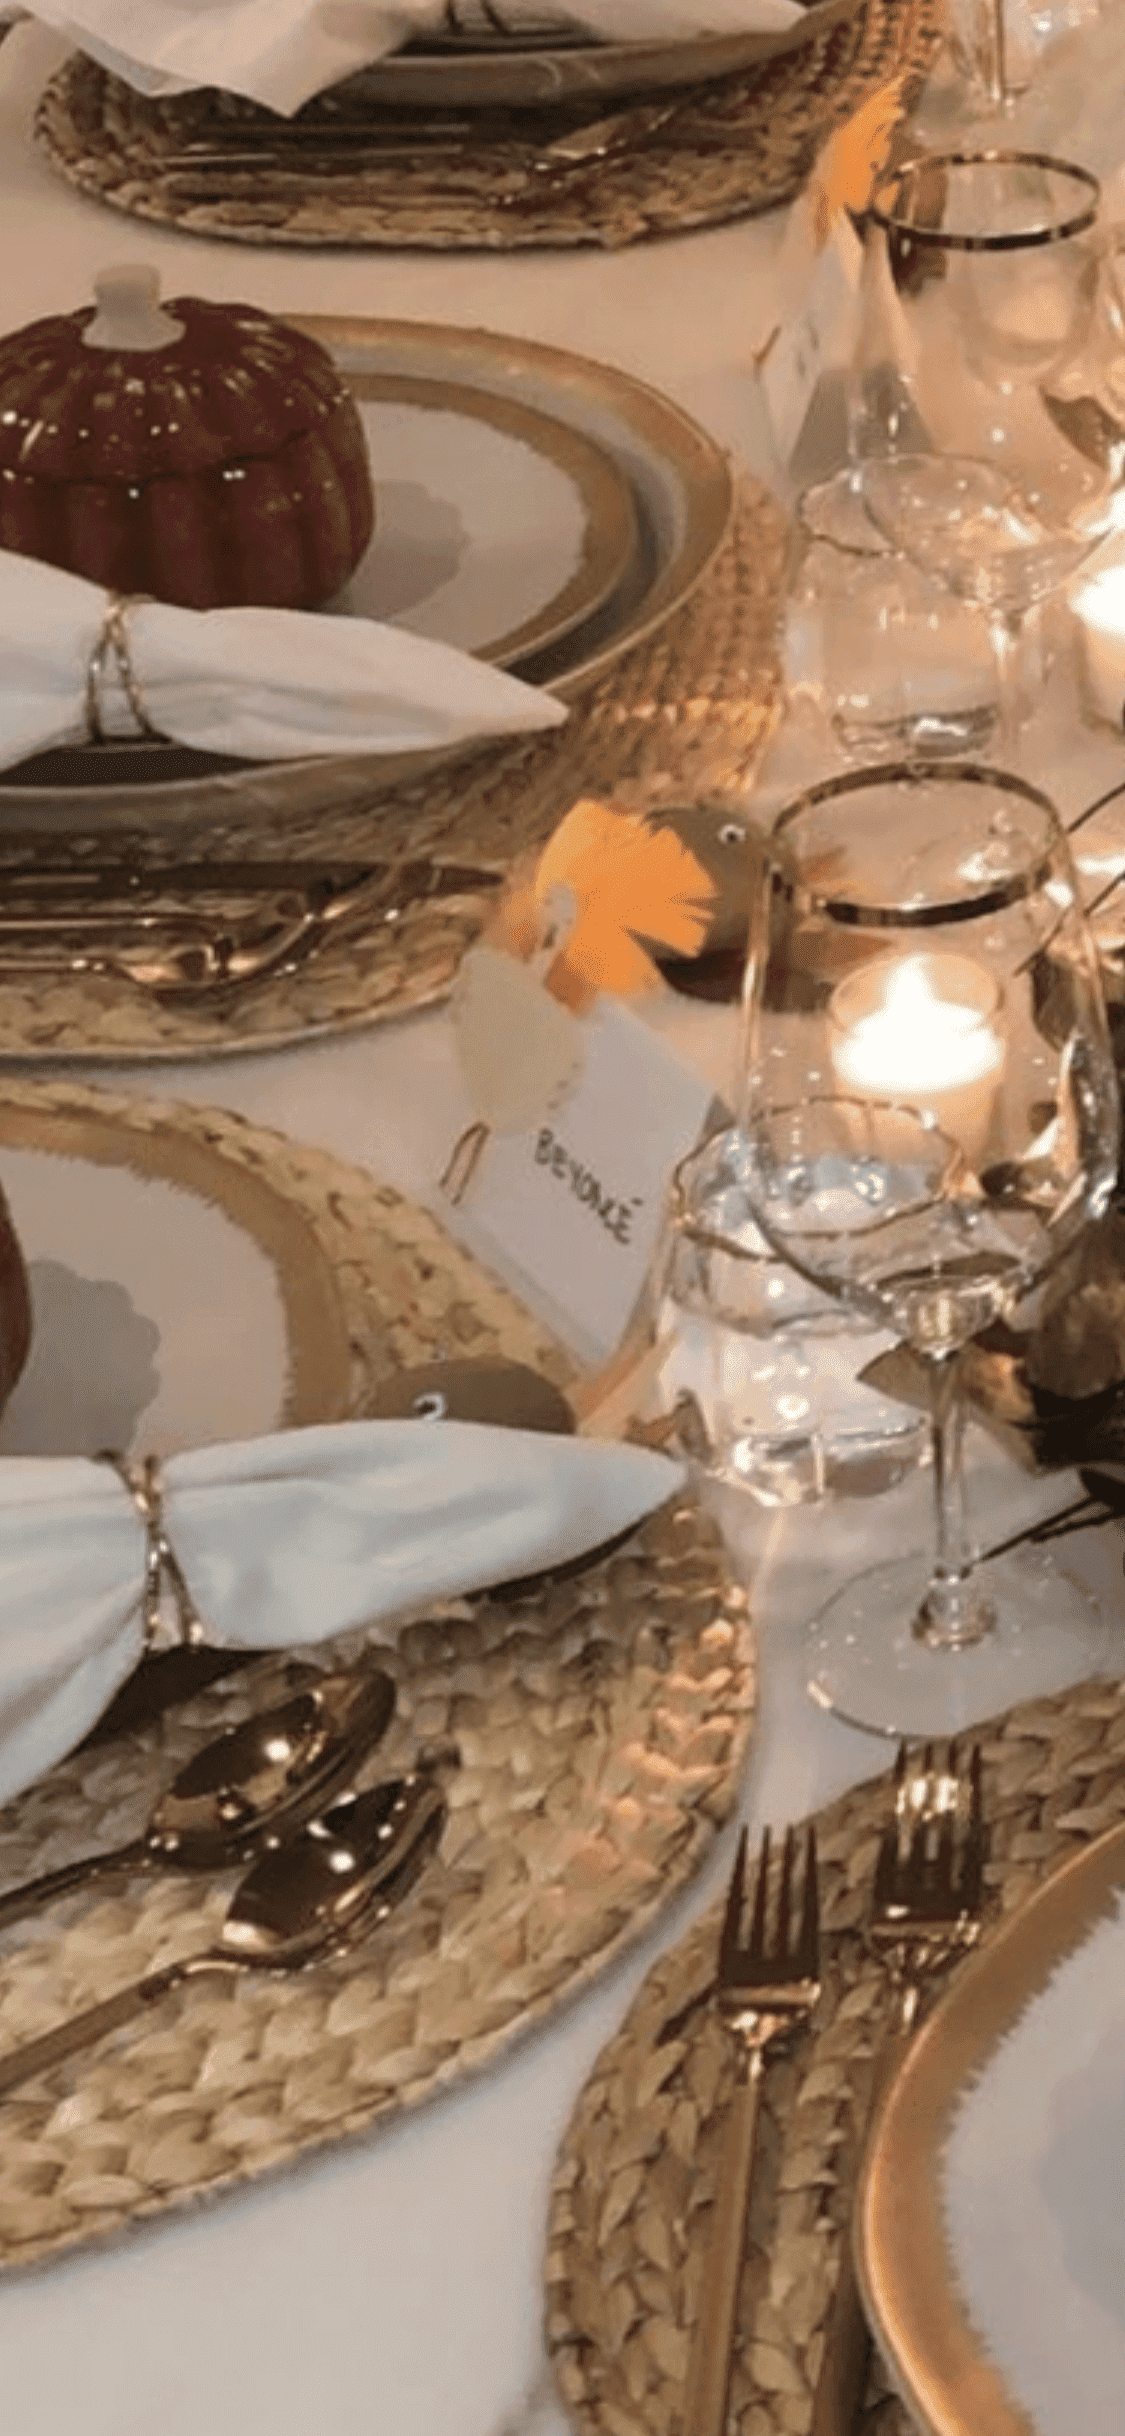 Kylie Jenner's incredible table setting complete with the "Beyonce" place card/ Source: Instagram/ KylieJenner